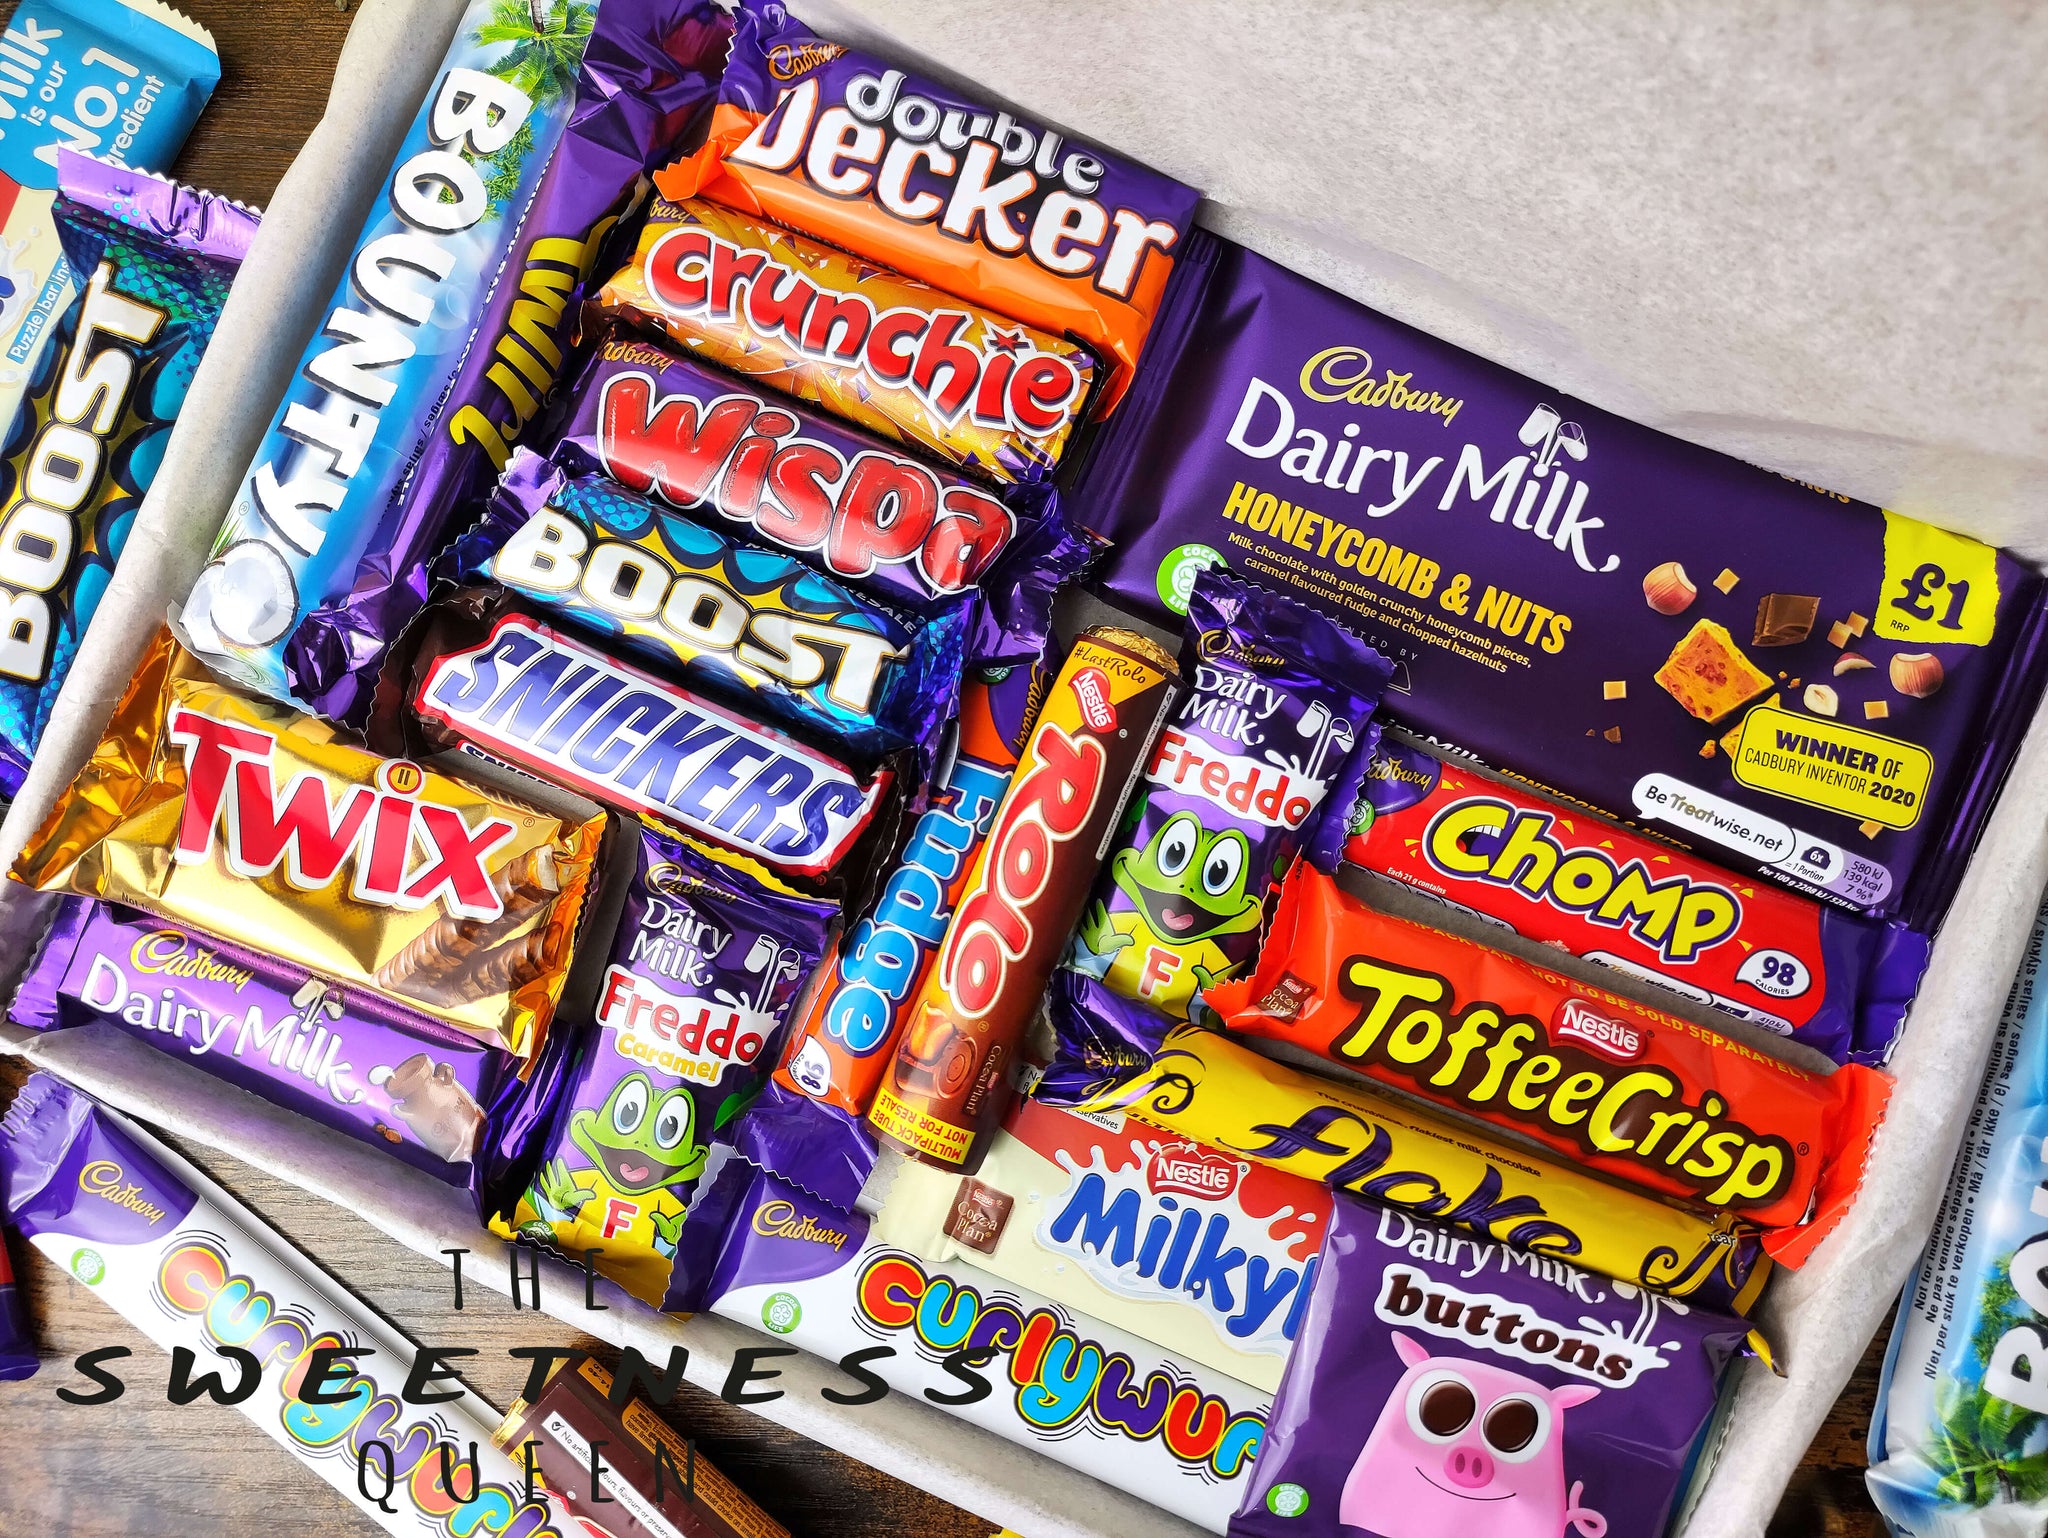 Is A Personalised Cadbury Chocolate Bar Gift From Cadbury Gifts Direct  Worth The Money?